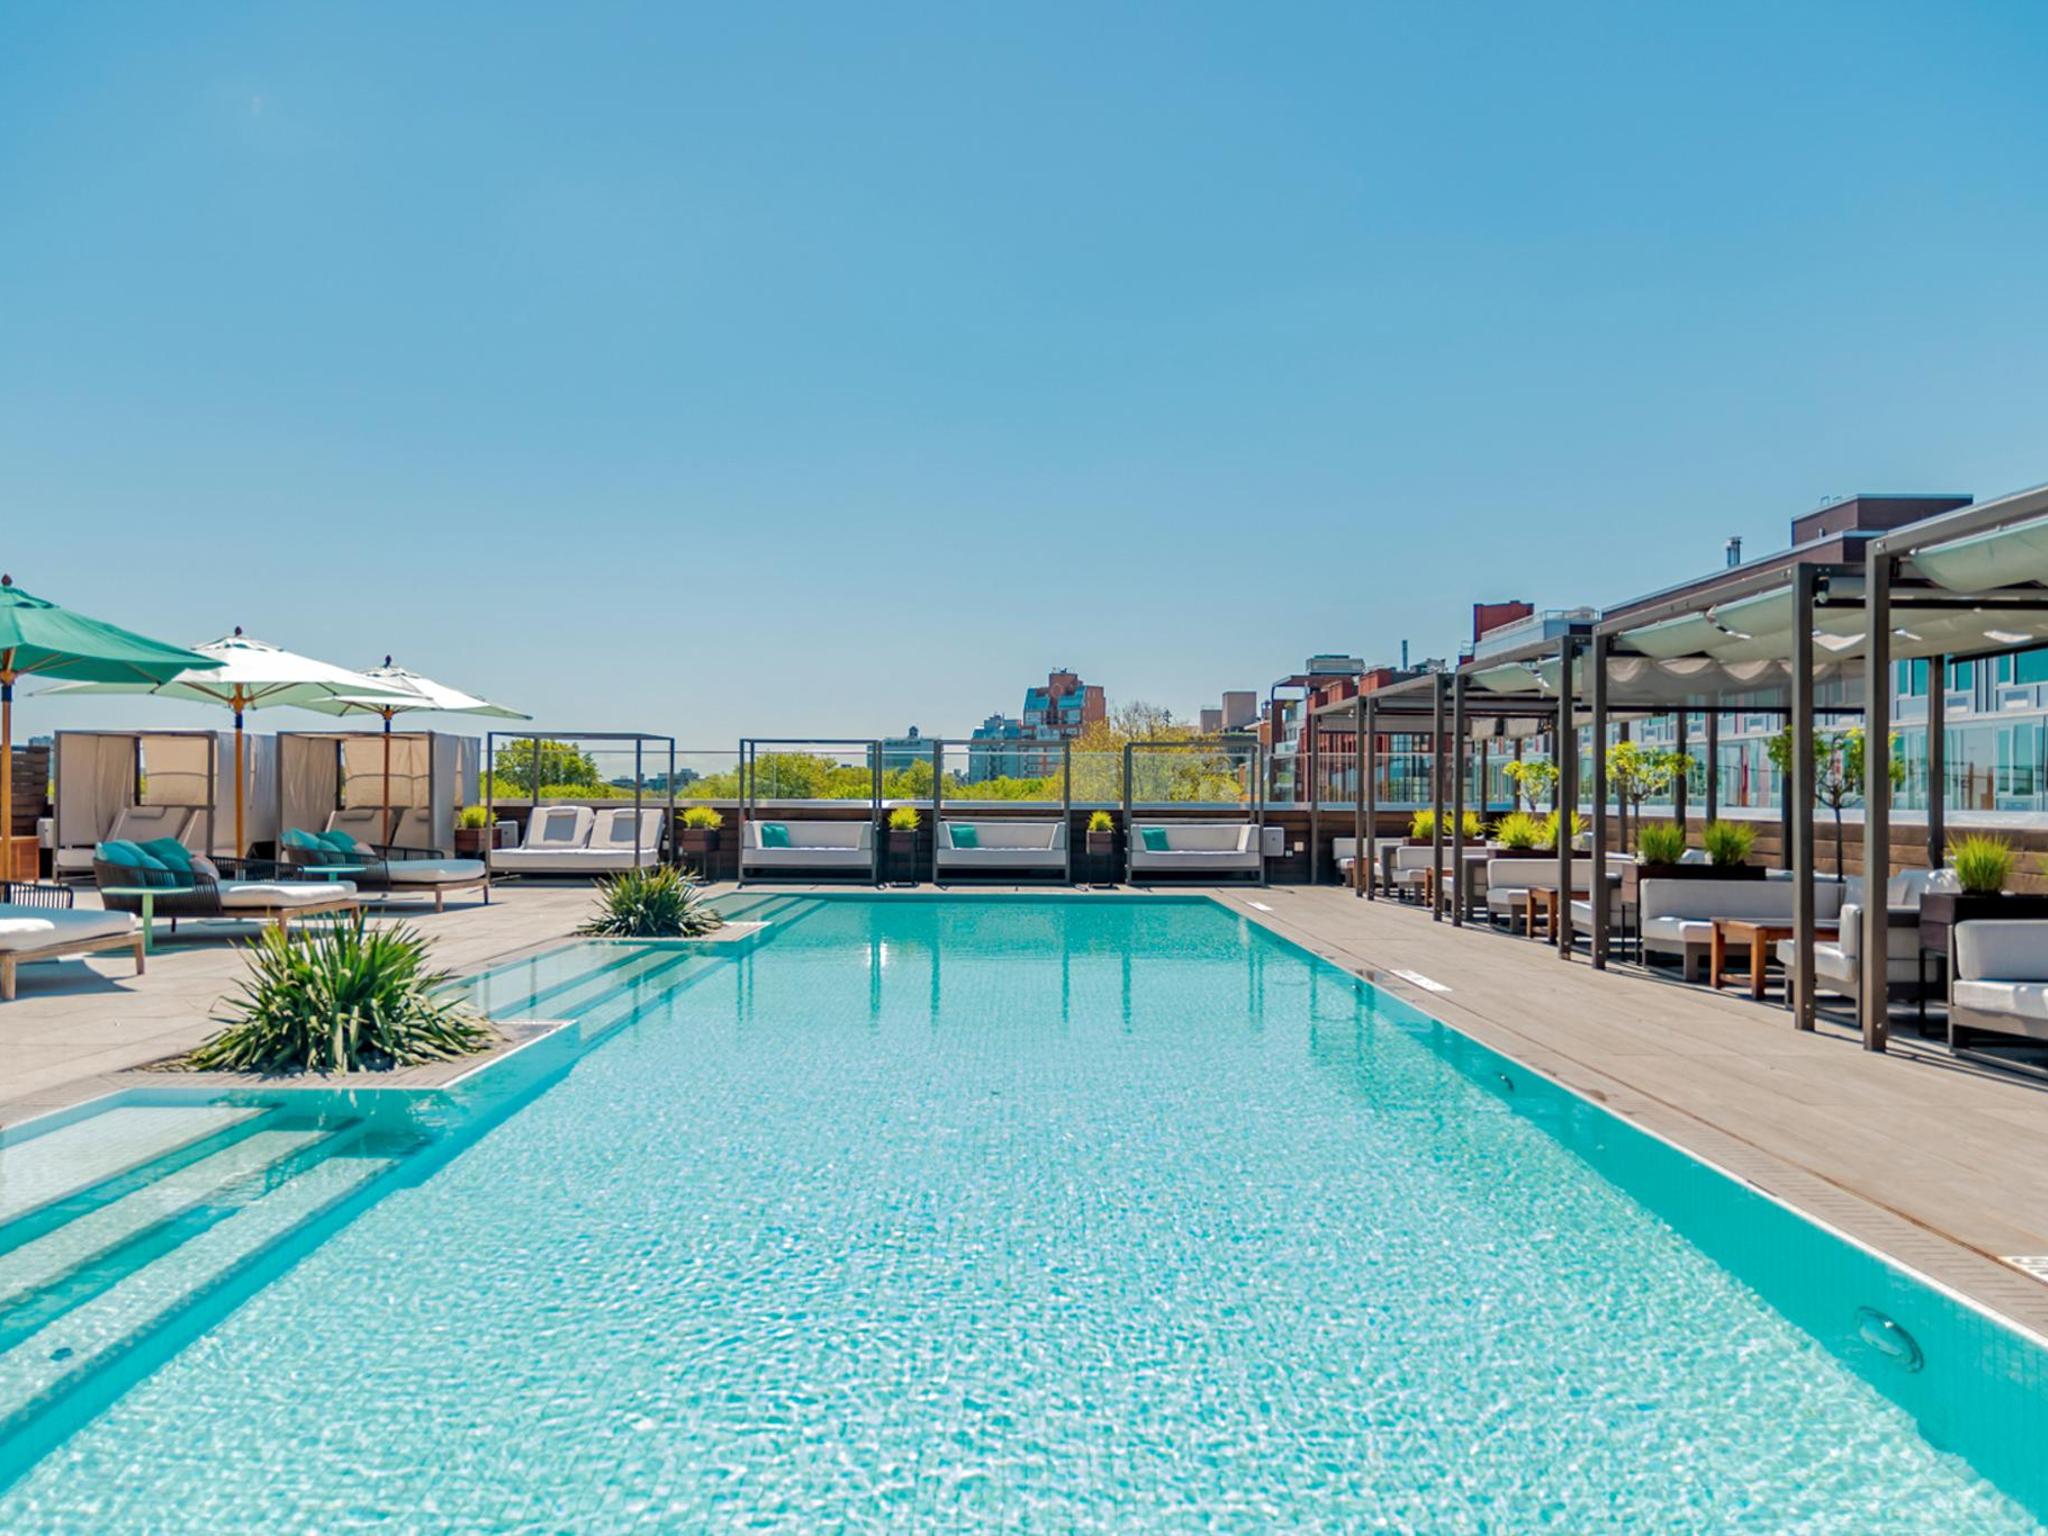 5 of New York City's most enticing rooftop pools | Booking.com